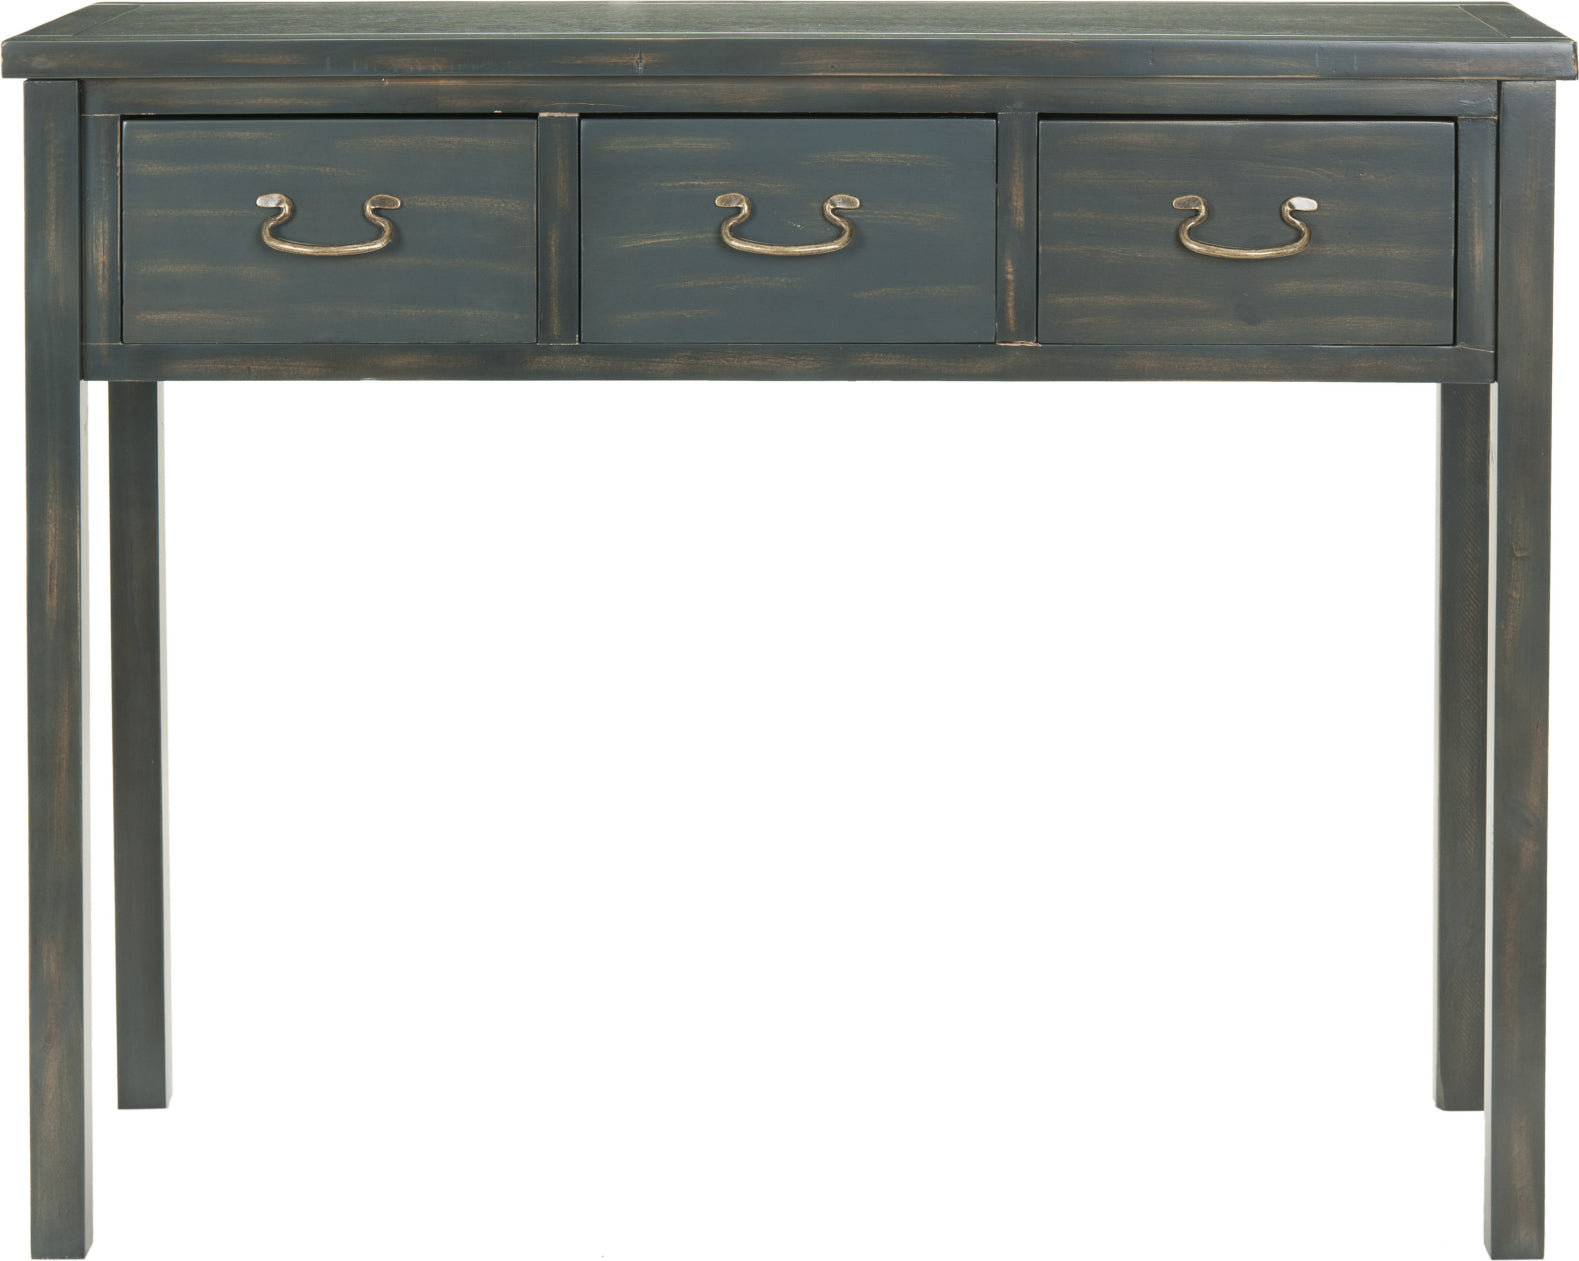 Safavieh Cindy Console With Storage Drawers Steel Teal Furniture main image